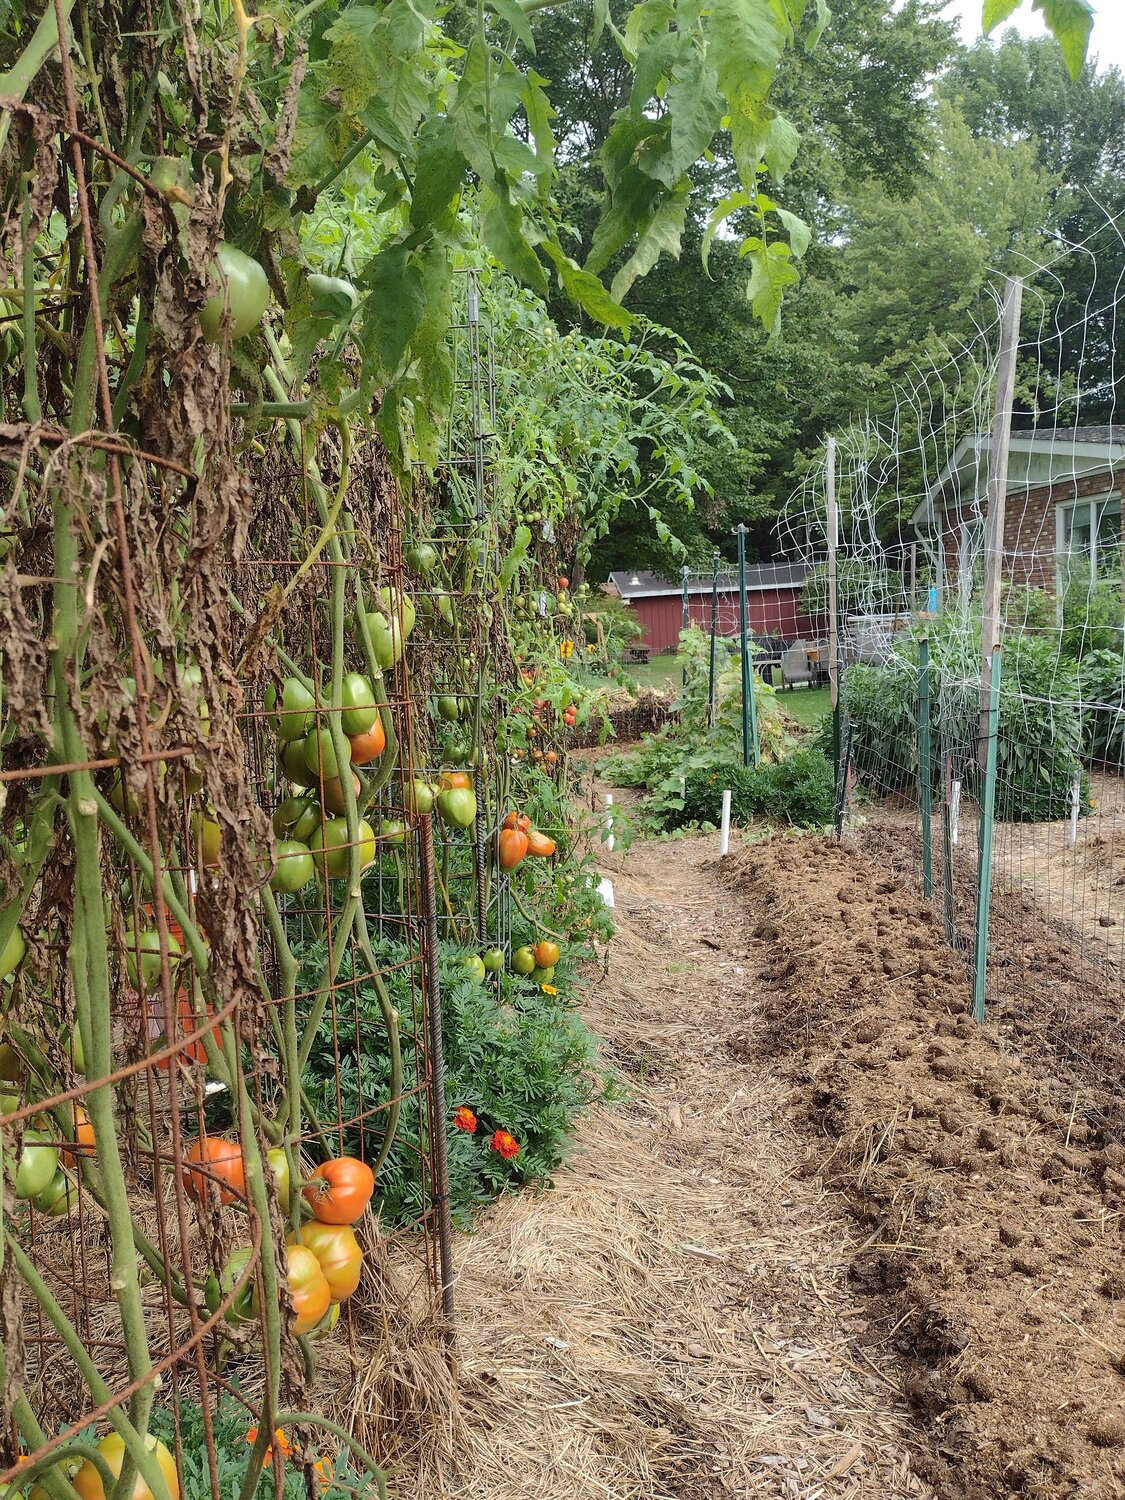 Bob Hoffman’s Victory Garden in Beach Lake, PA, employs fencing to keep out deer and rabbits.